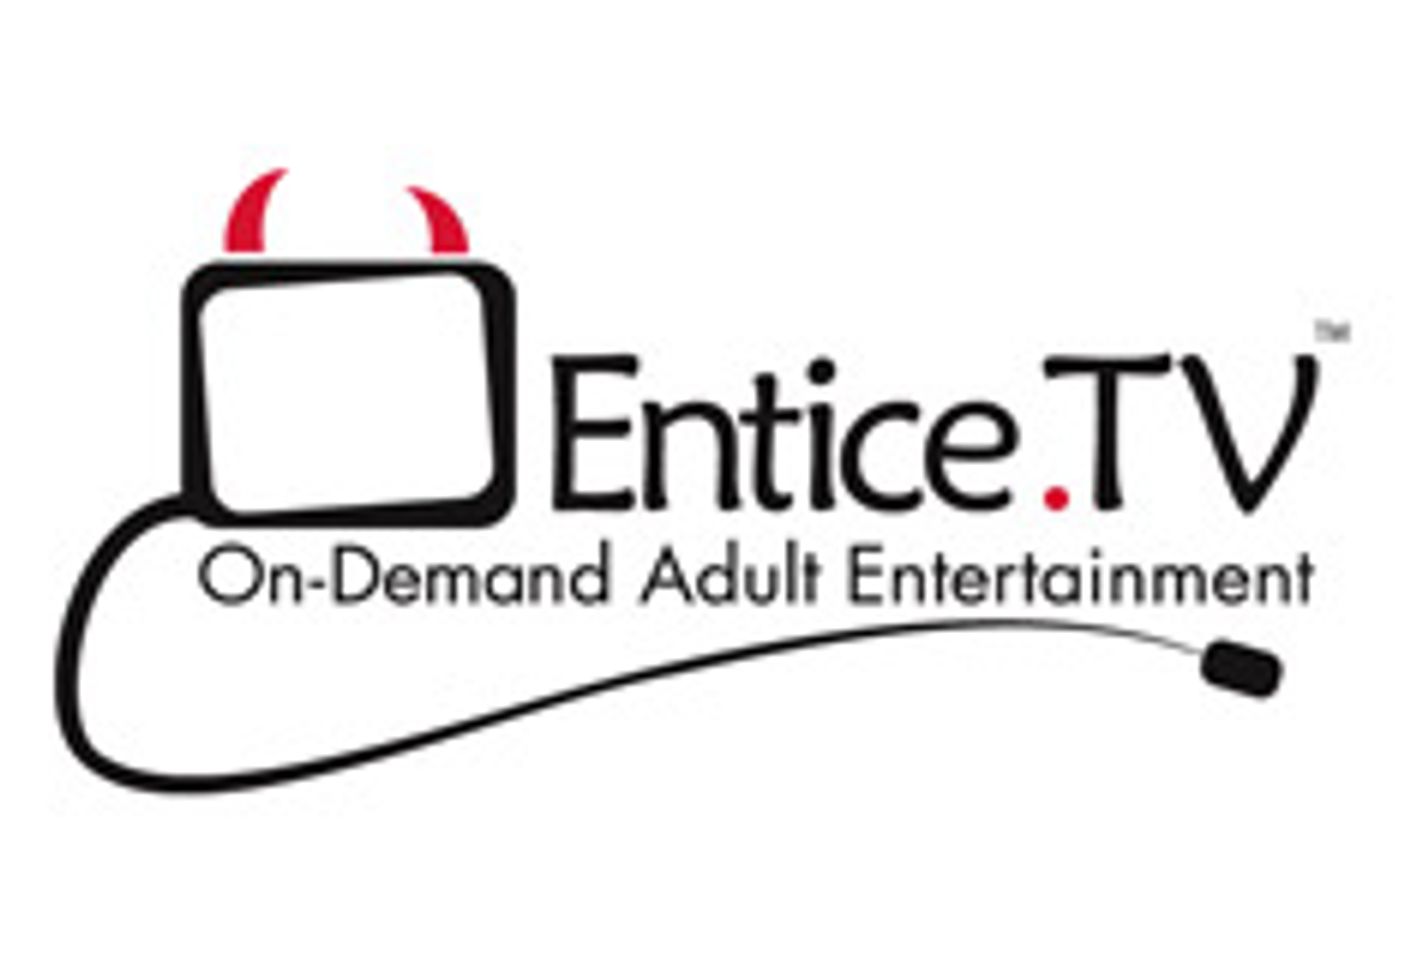 Entice.tv Bringing IPTV to Gay Adult Industry